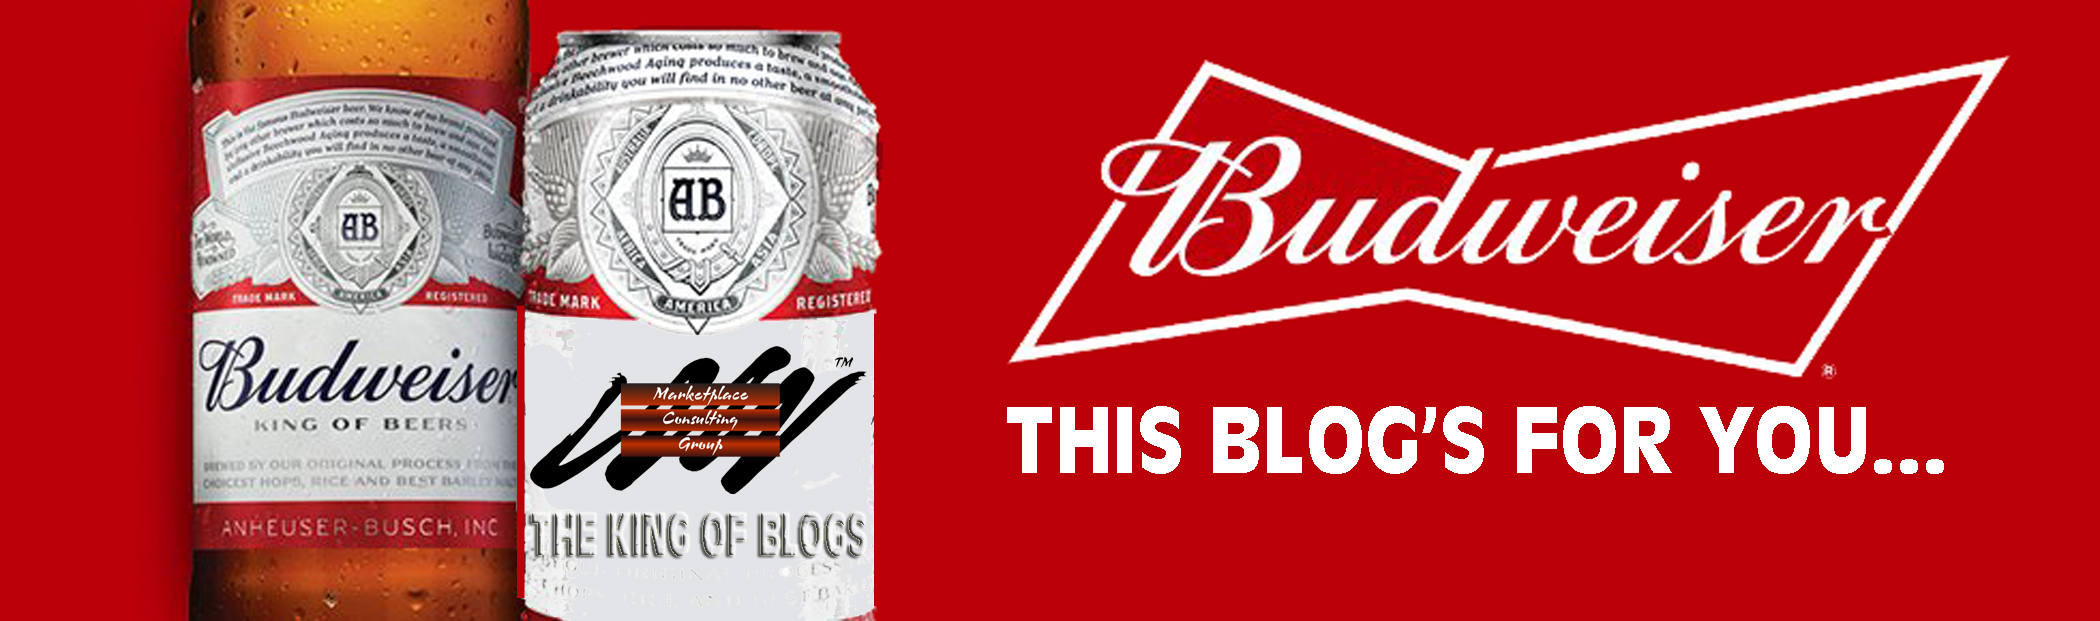 Budweiser: This Blogs for You